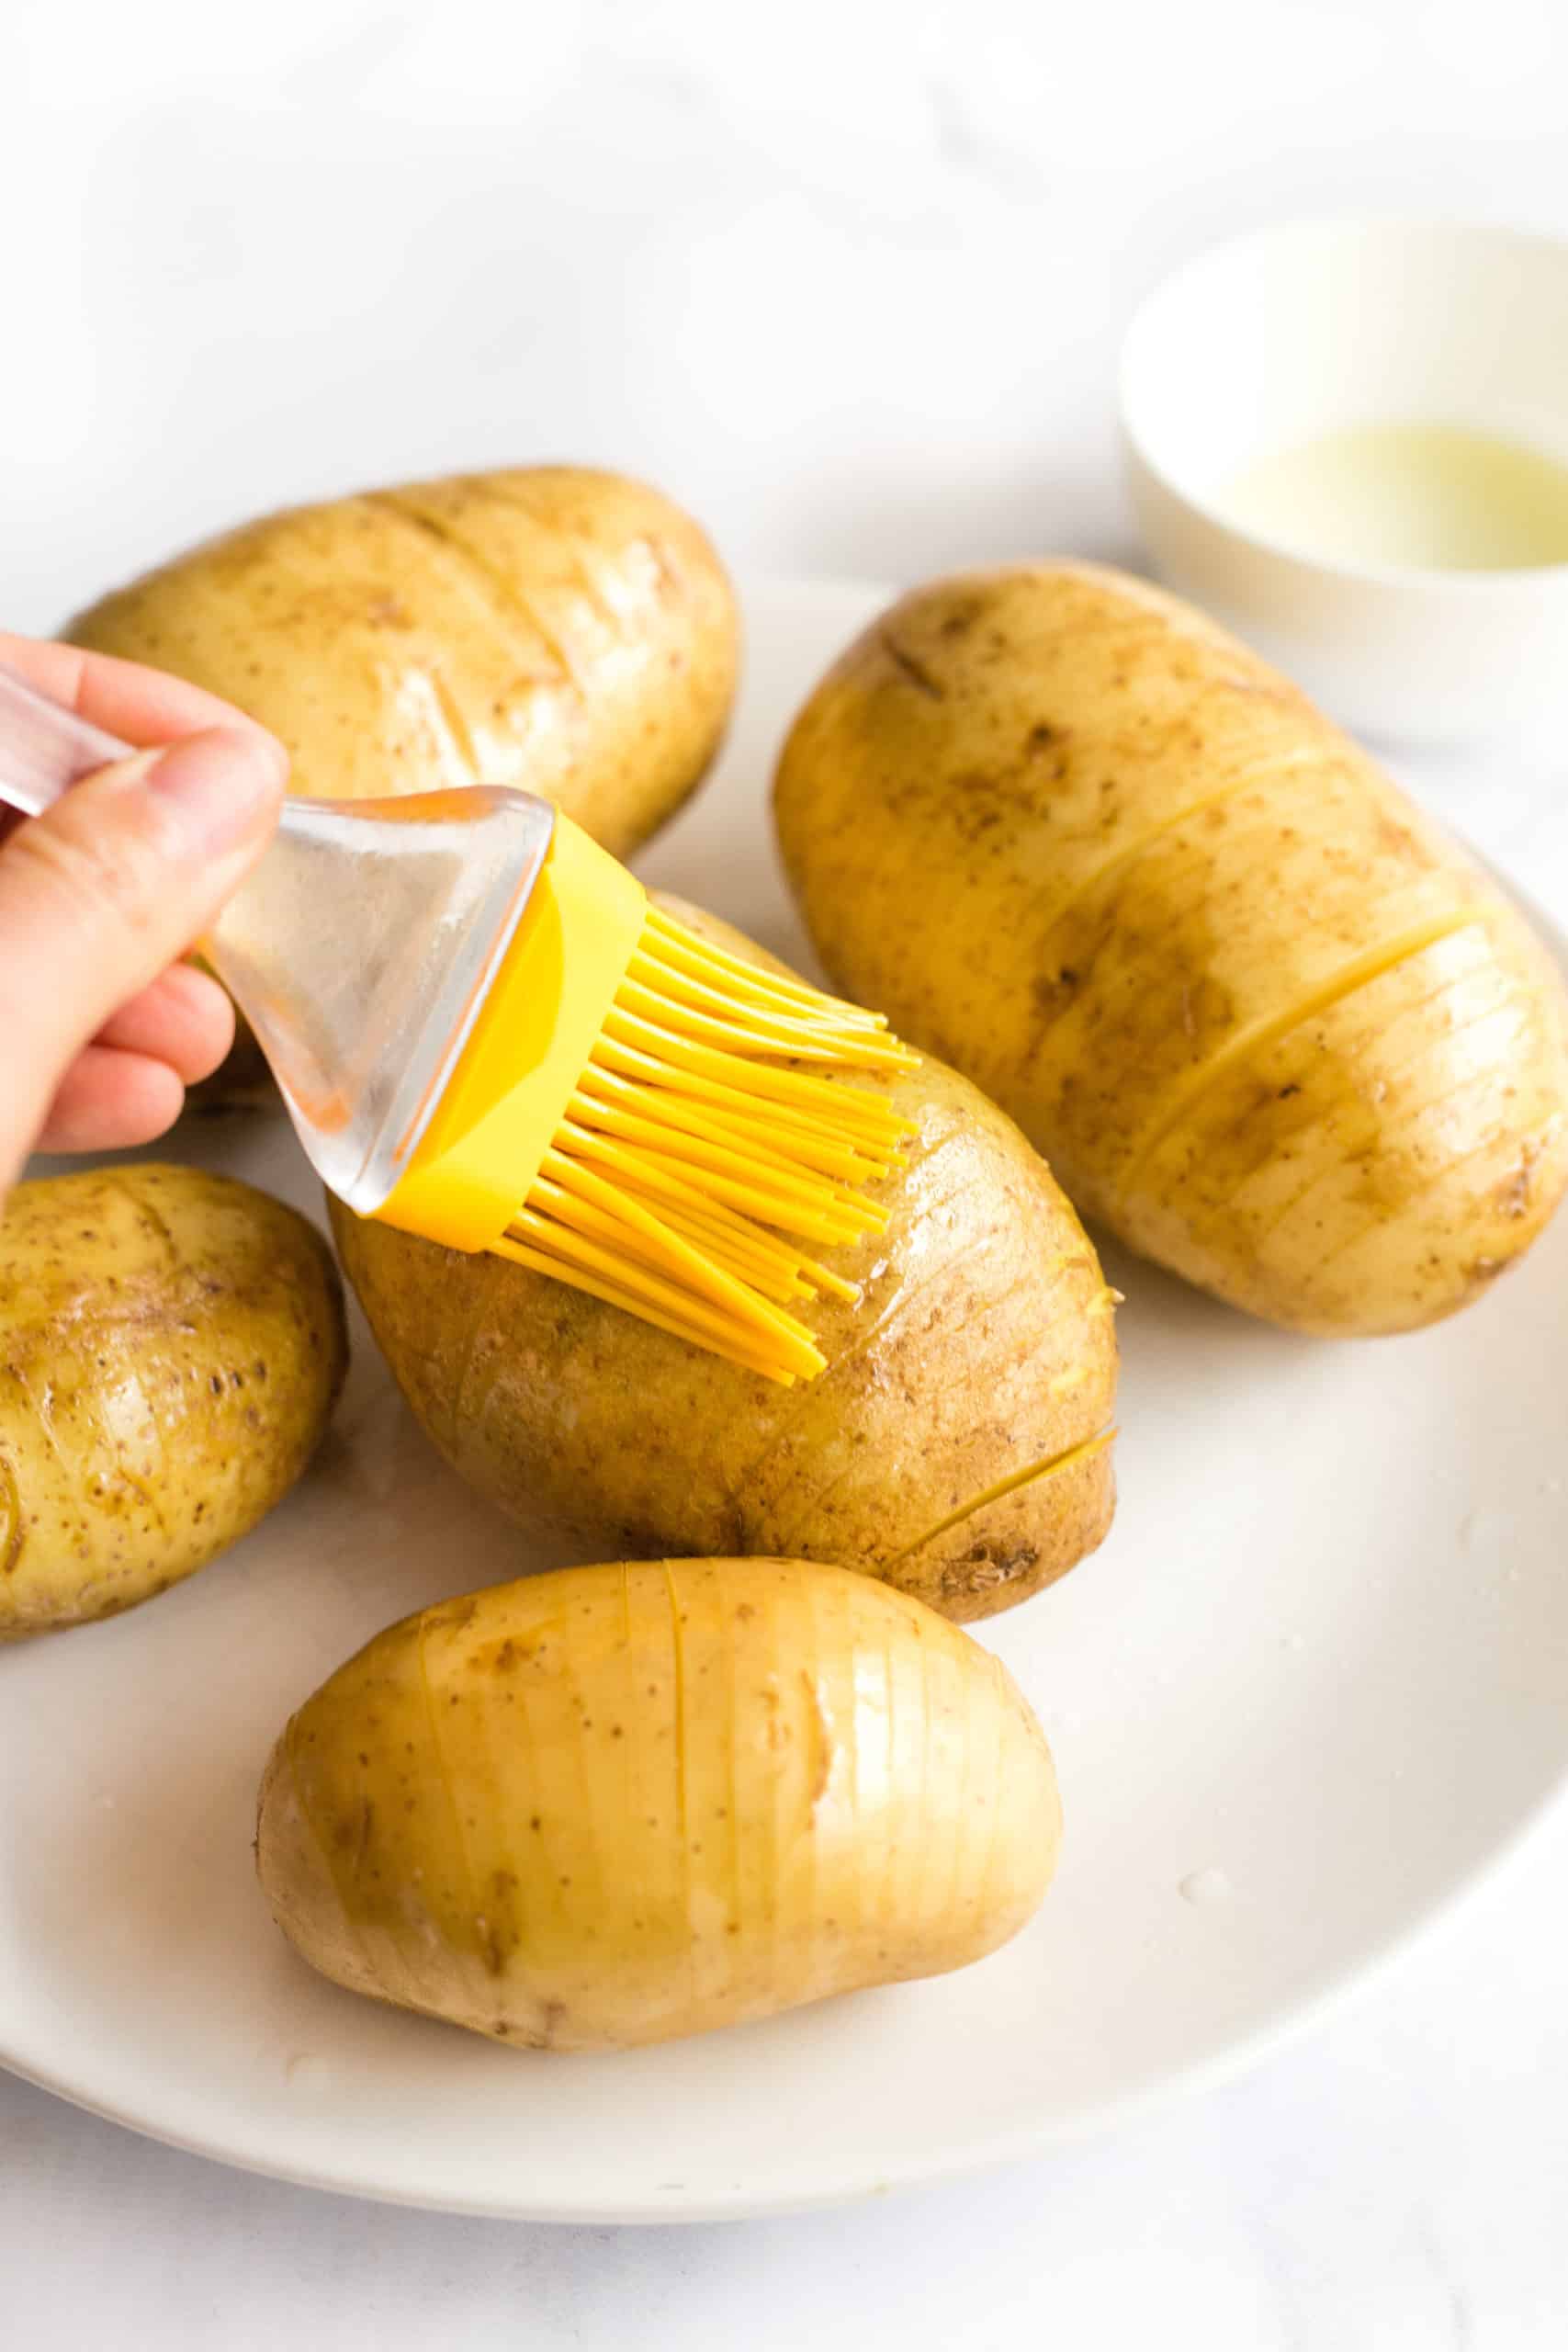 Using a silicon brush to brush sliced potatoes with oil.